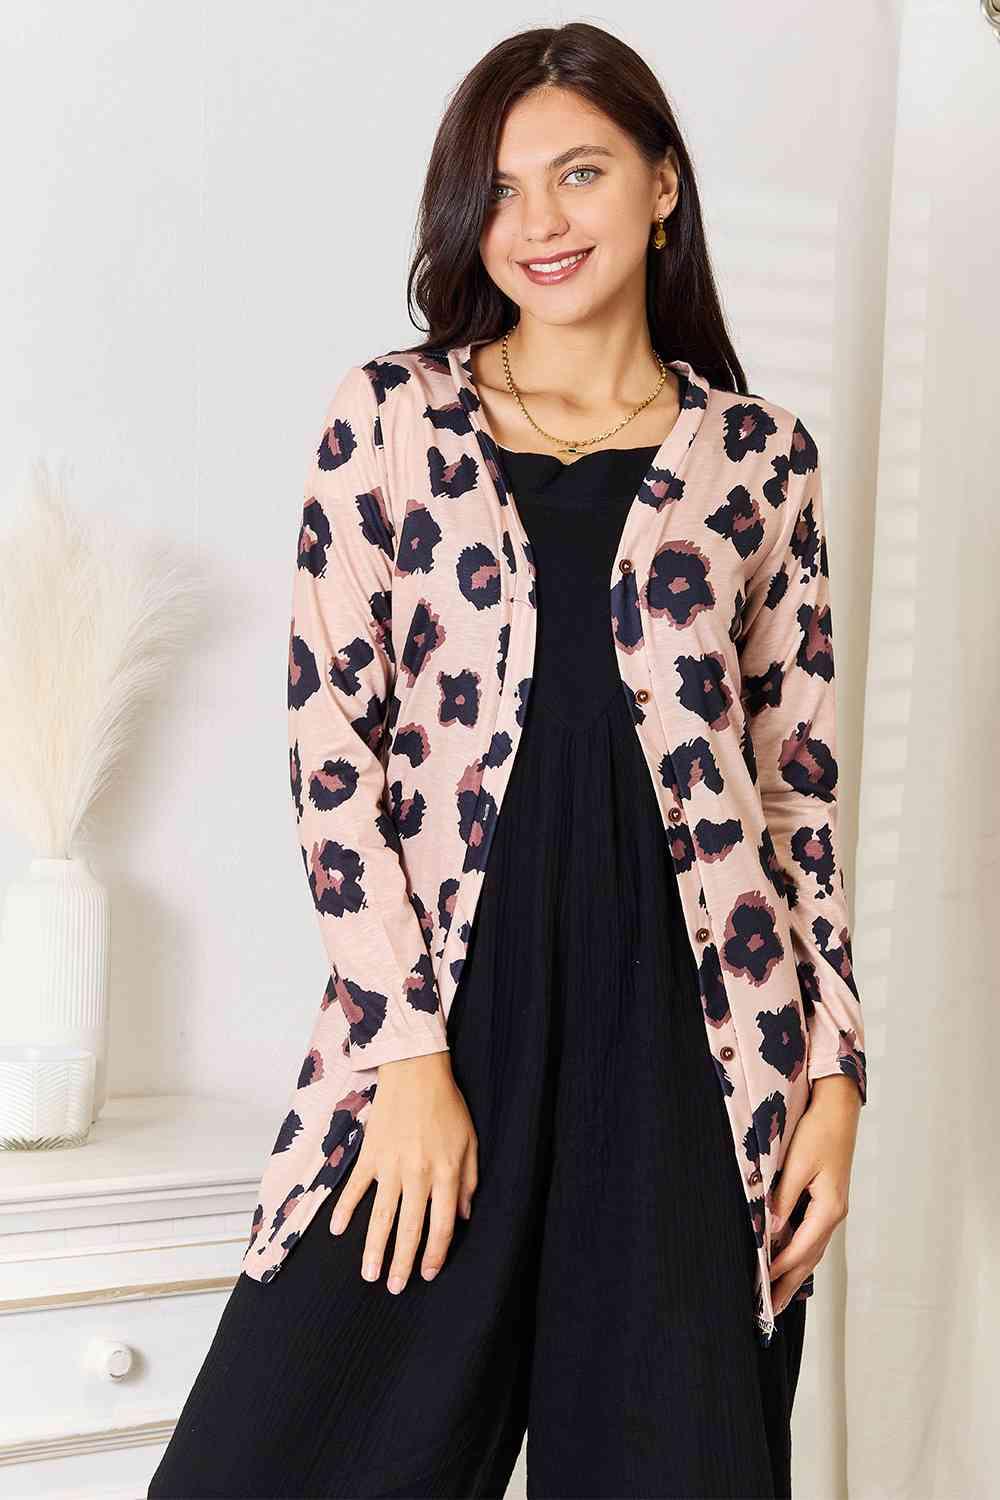 Double Take Printed Button Front Longline Cardigan - Happily Ever Atchison Shop Co.